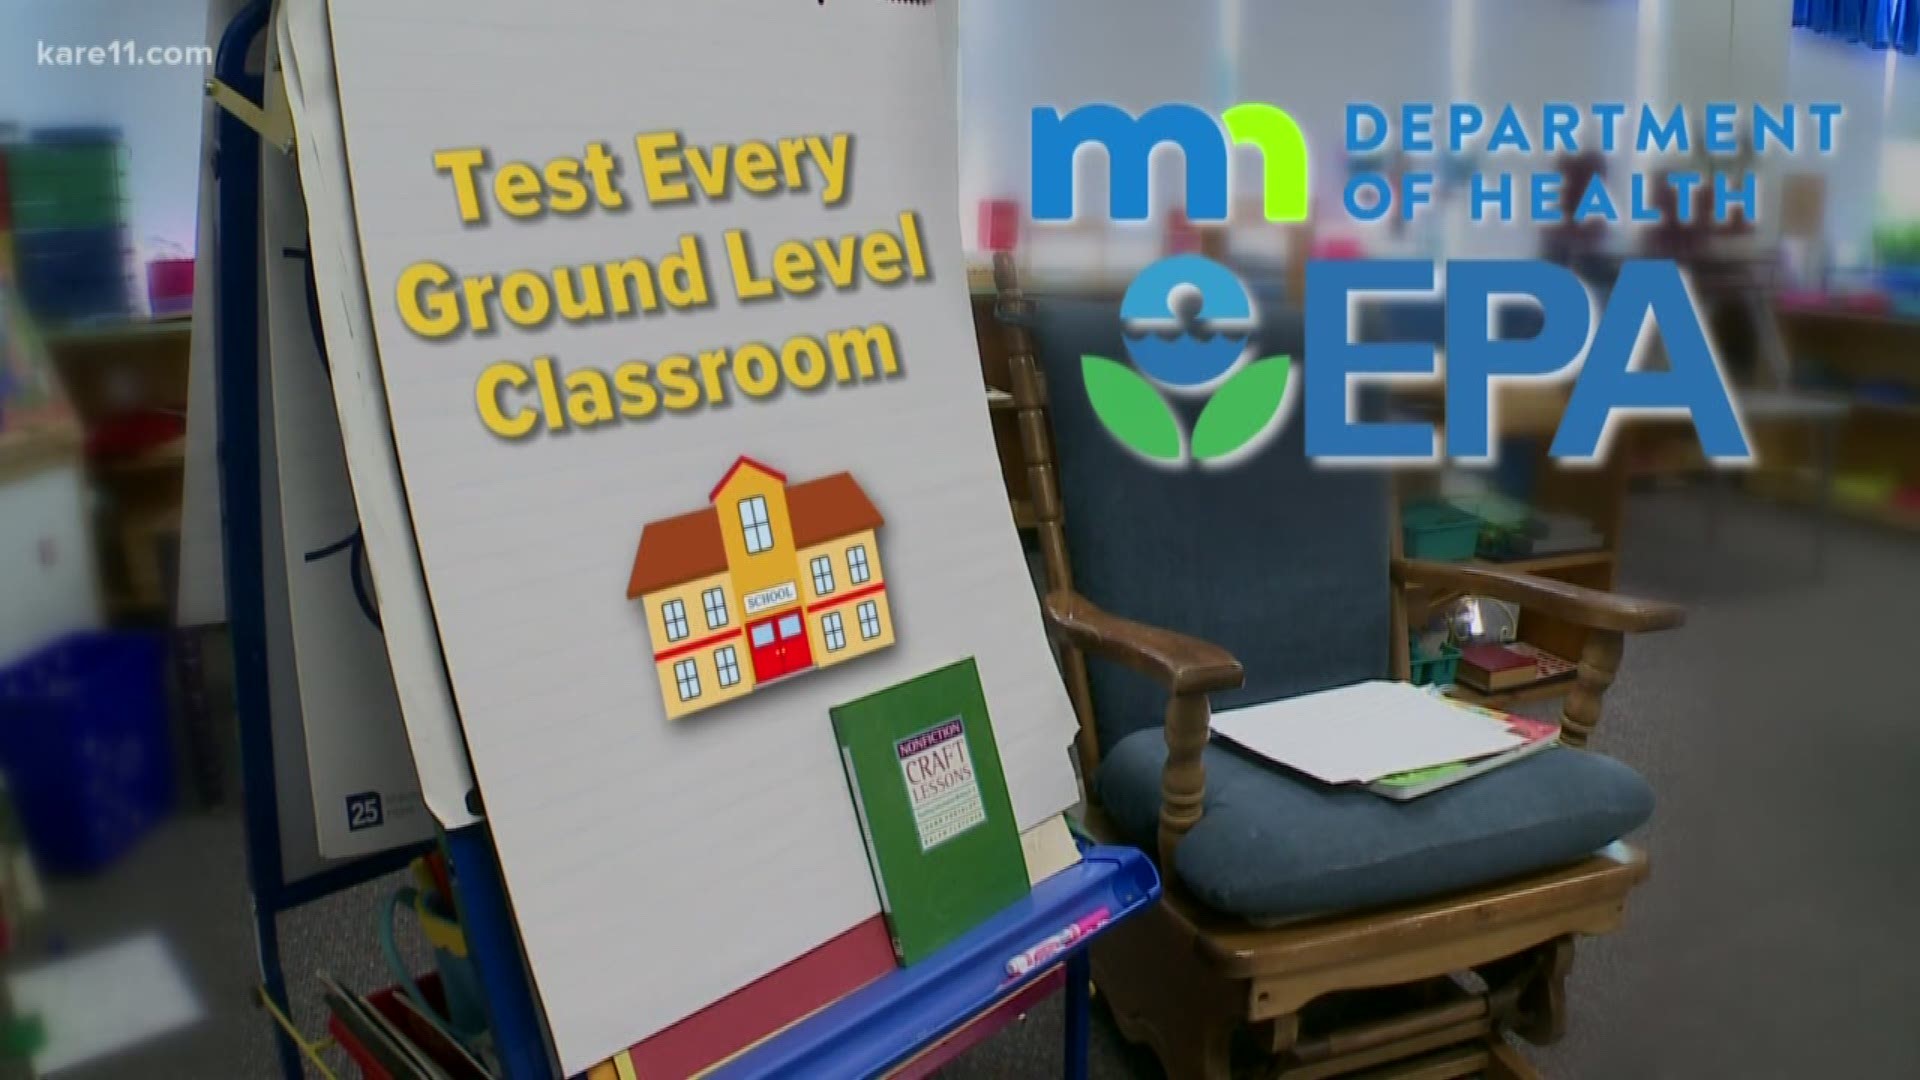 Lawmakers consider mandatory school radon testing after KARE 11 revealed 84 percent of Minnesota schools fail to properly test for the cancer-causing gas.